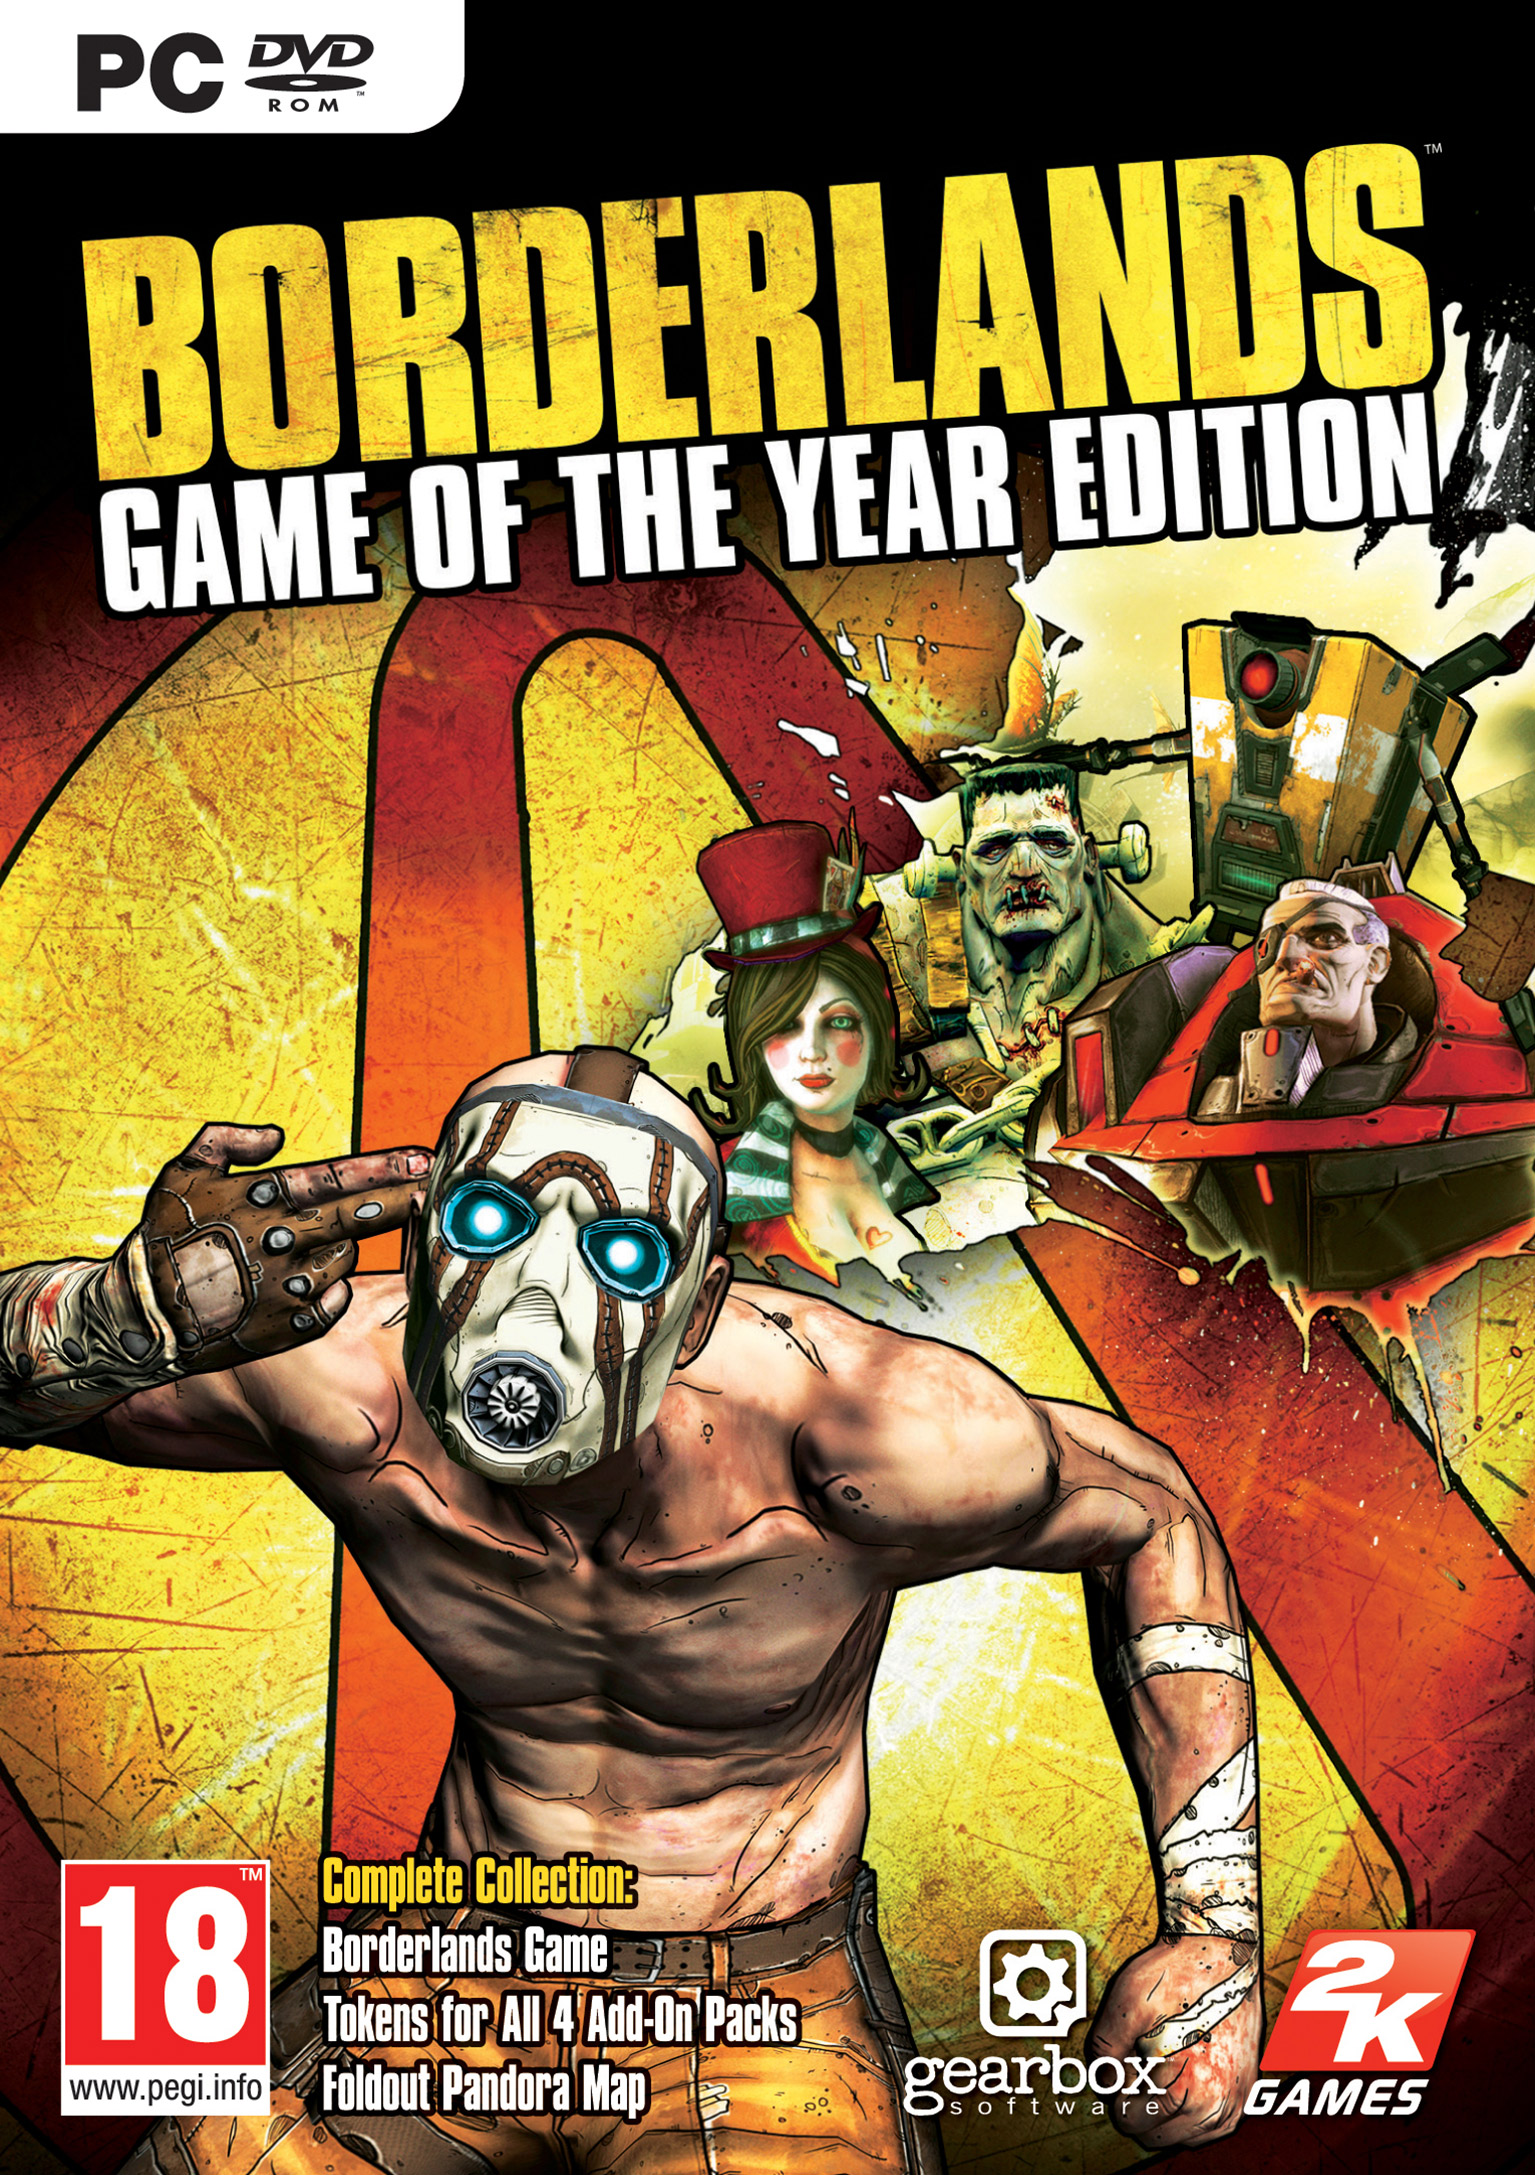 Borderlands: Game of the Year Edition - pedn DVD obal